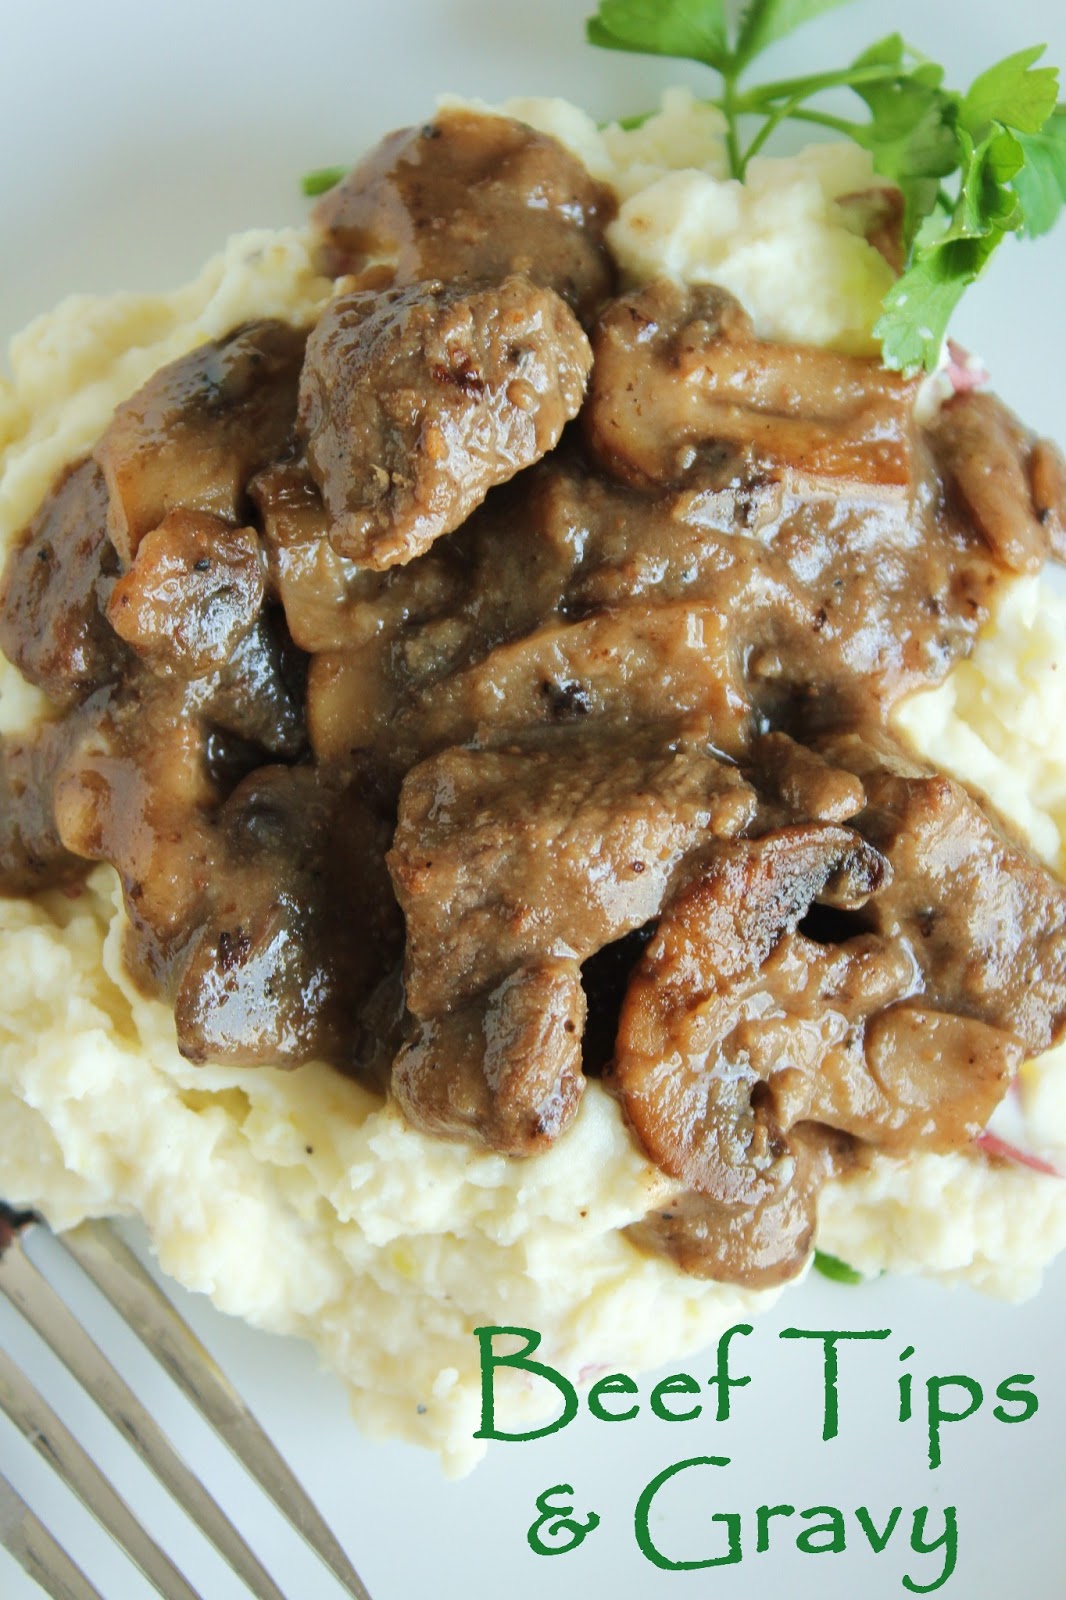 Delicious as it Looks: Beef Tips & Gravy, Oh My!